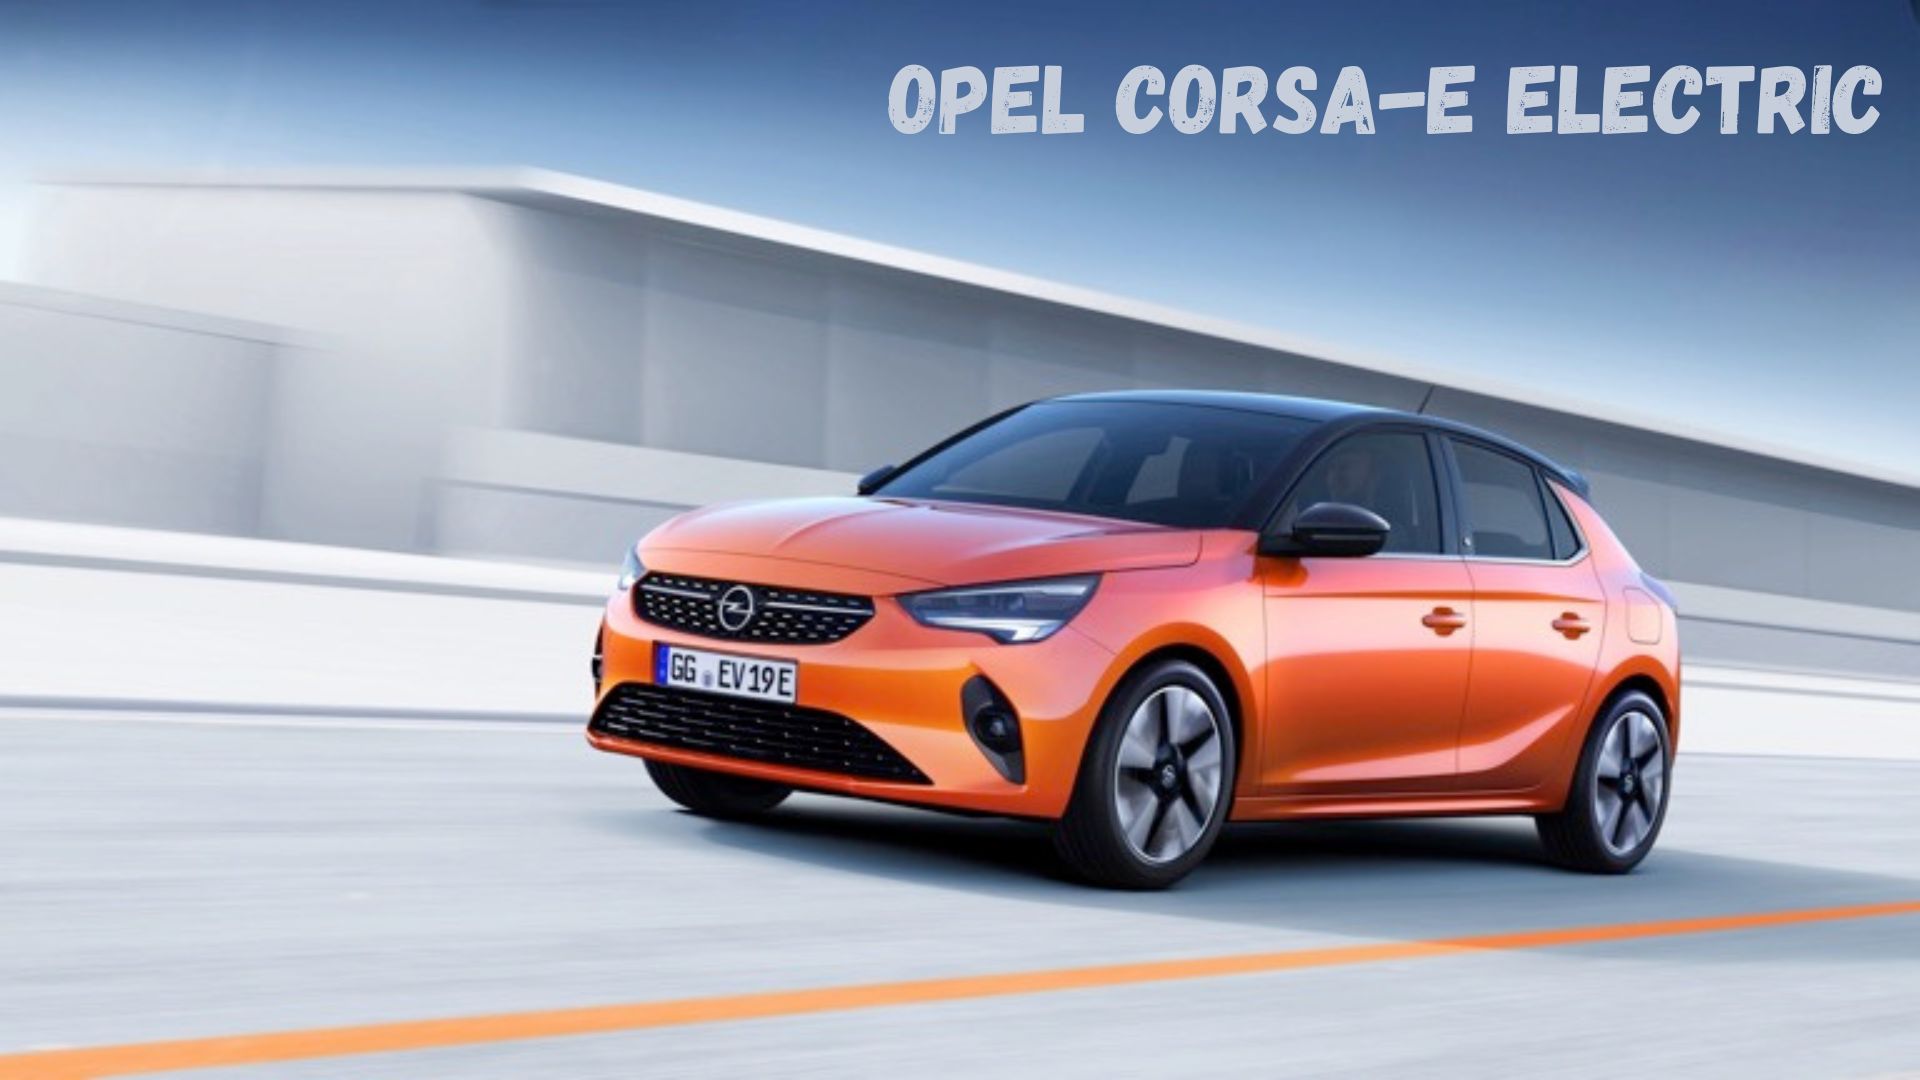 https://e-vehicleinfo.com/global/opel-corsa-e-electric-price-battery-top-speed-specification/